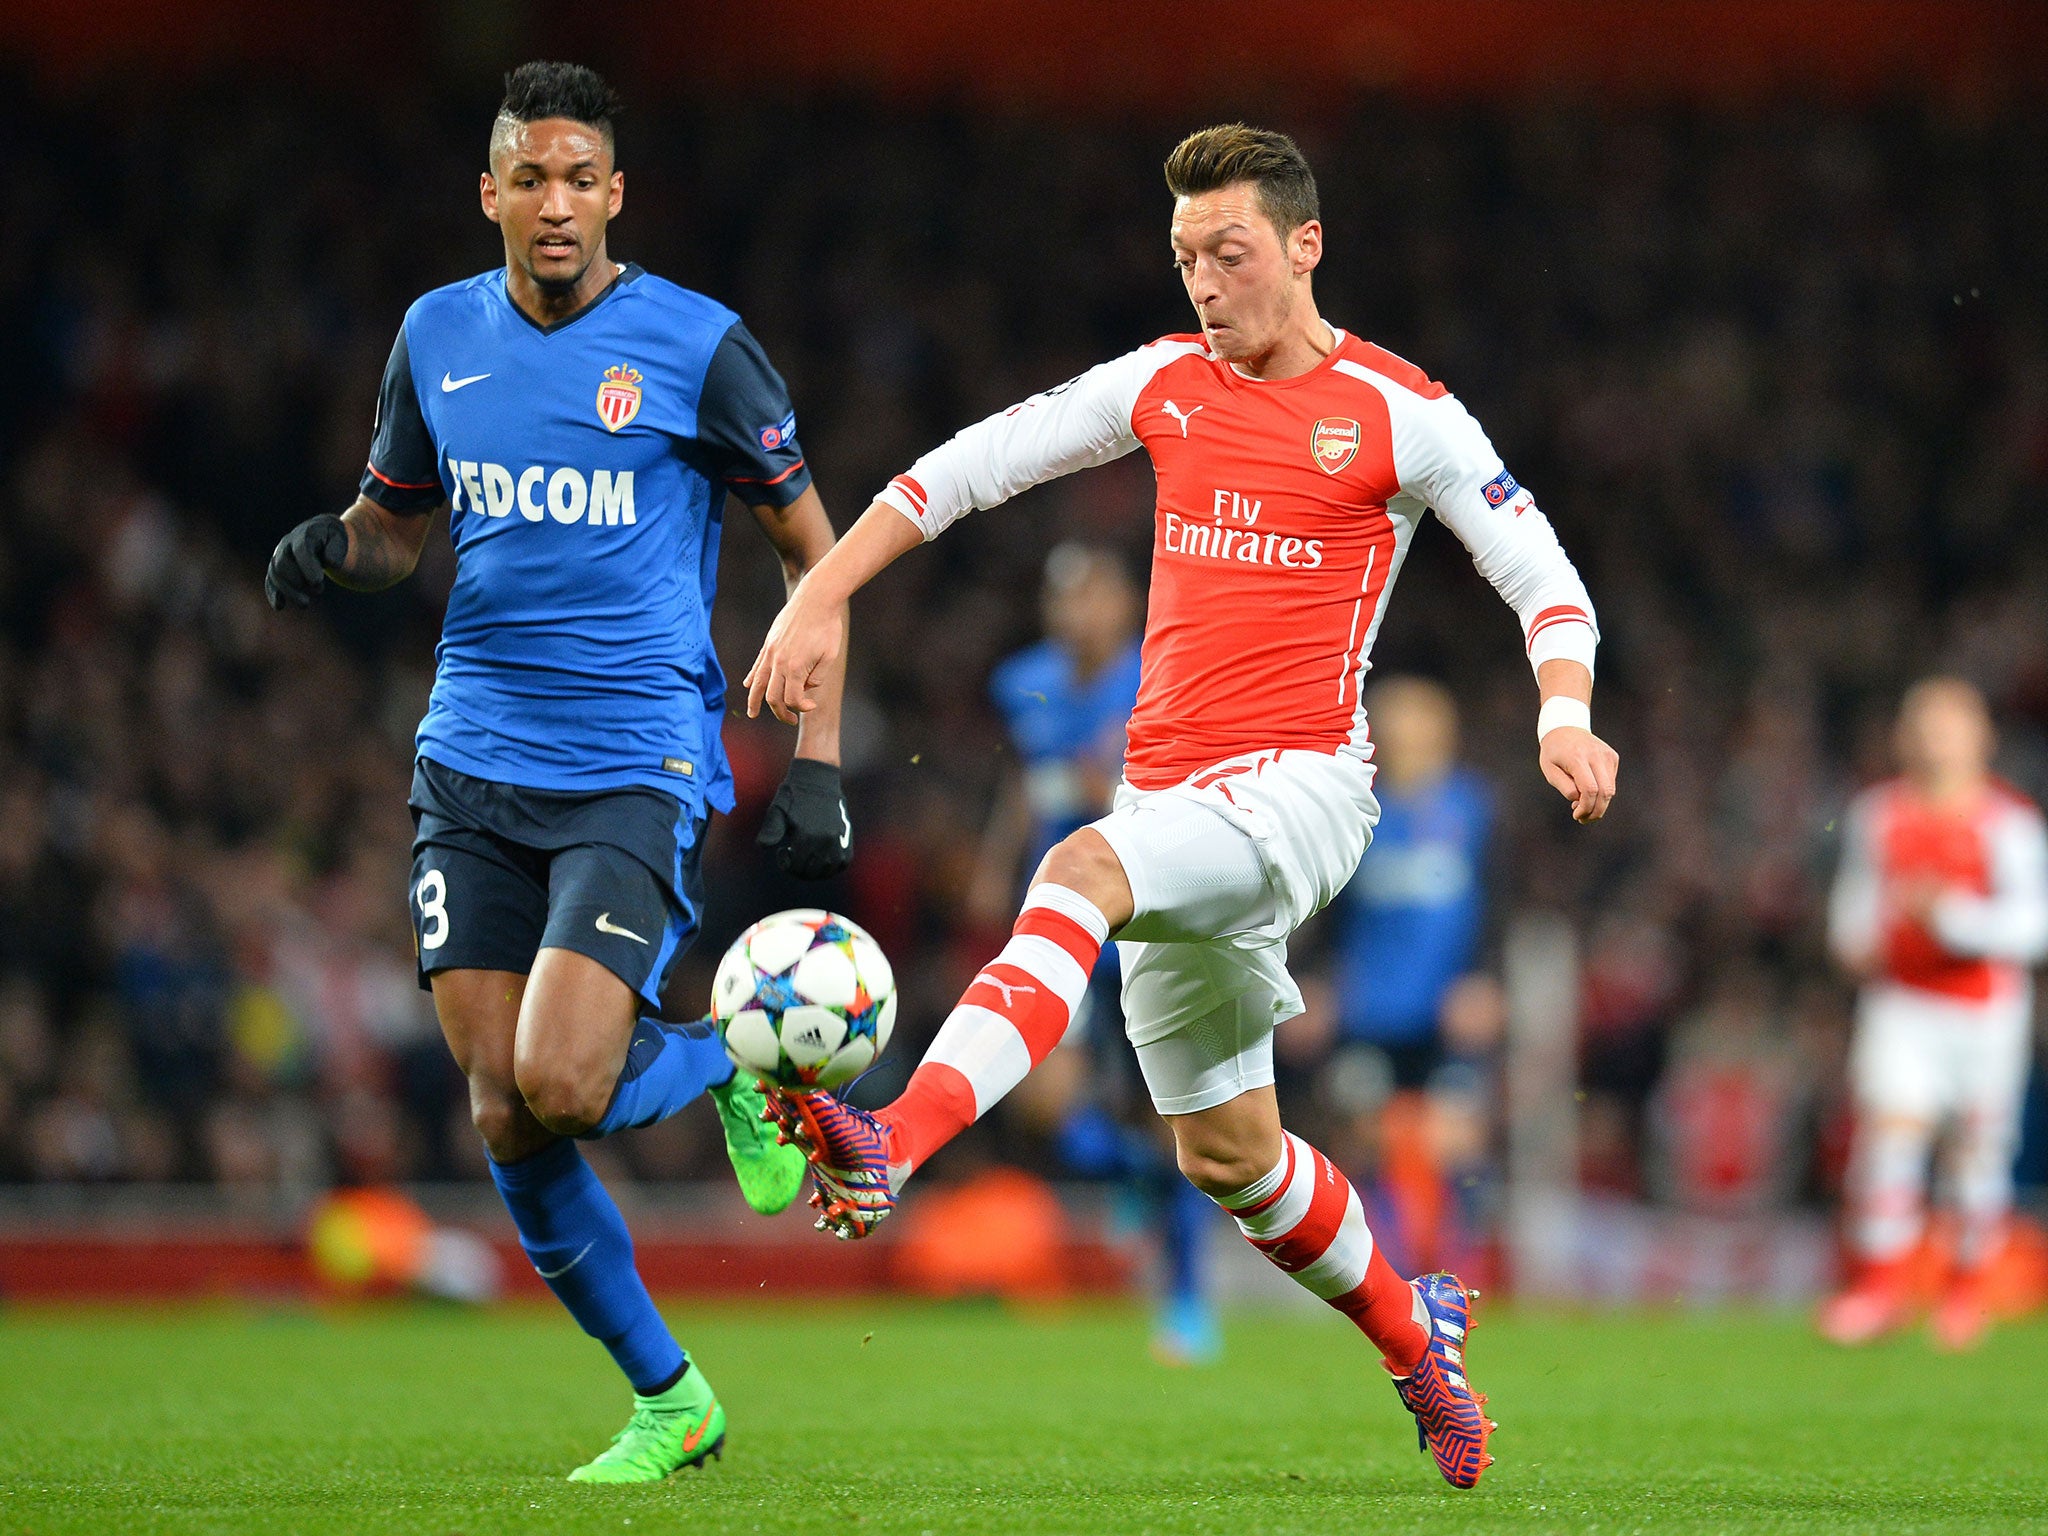 Wallace marks Mesut Özil (right), who lost possession too often playing moderate passes